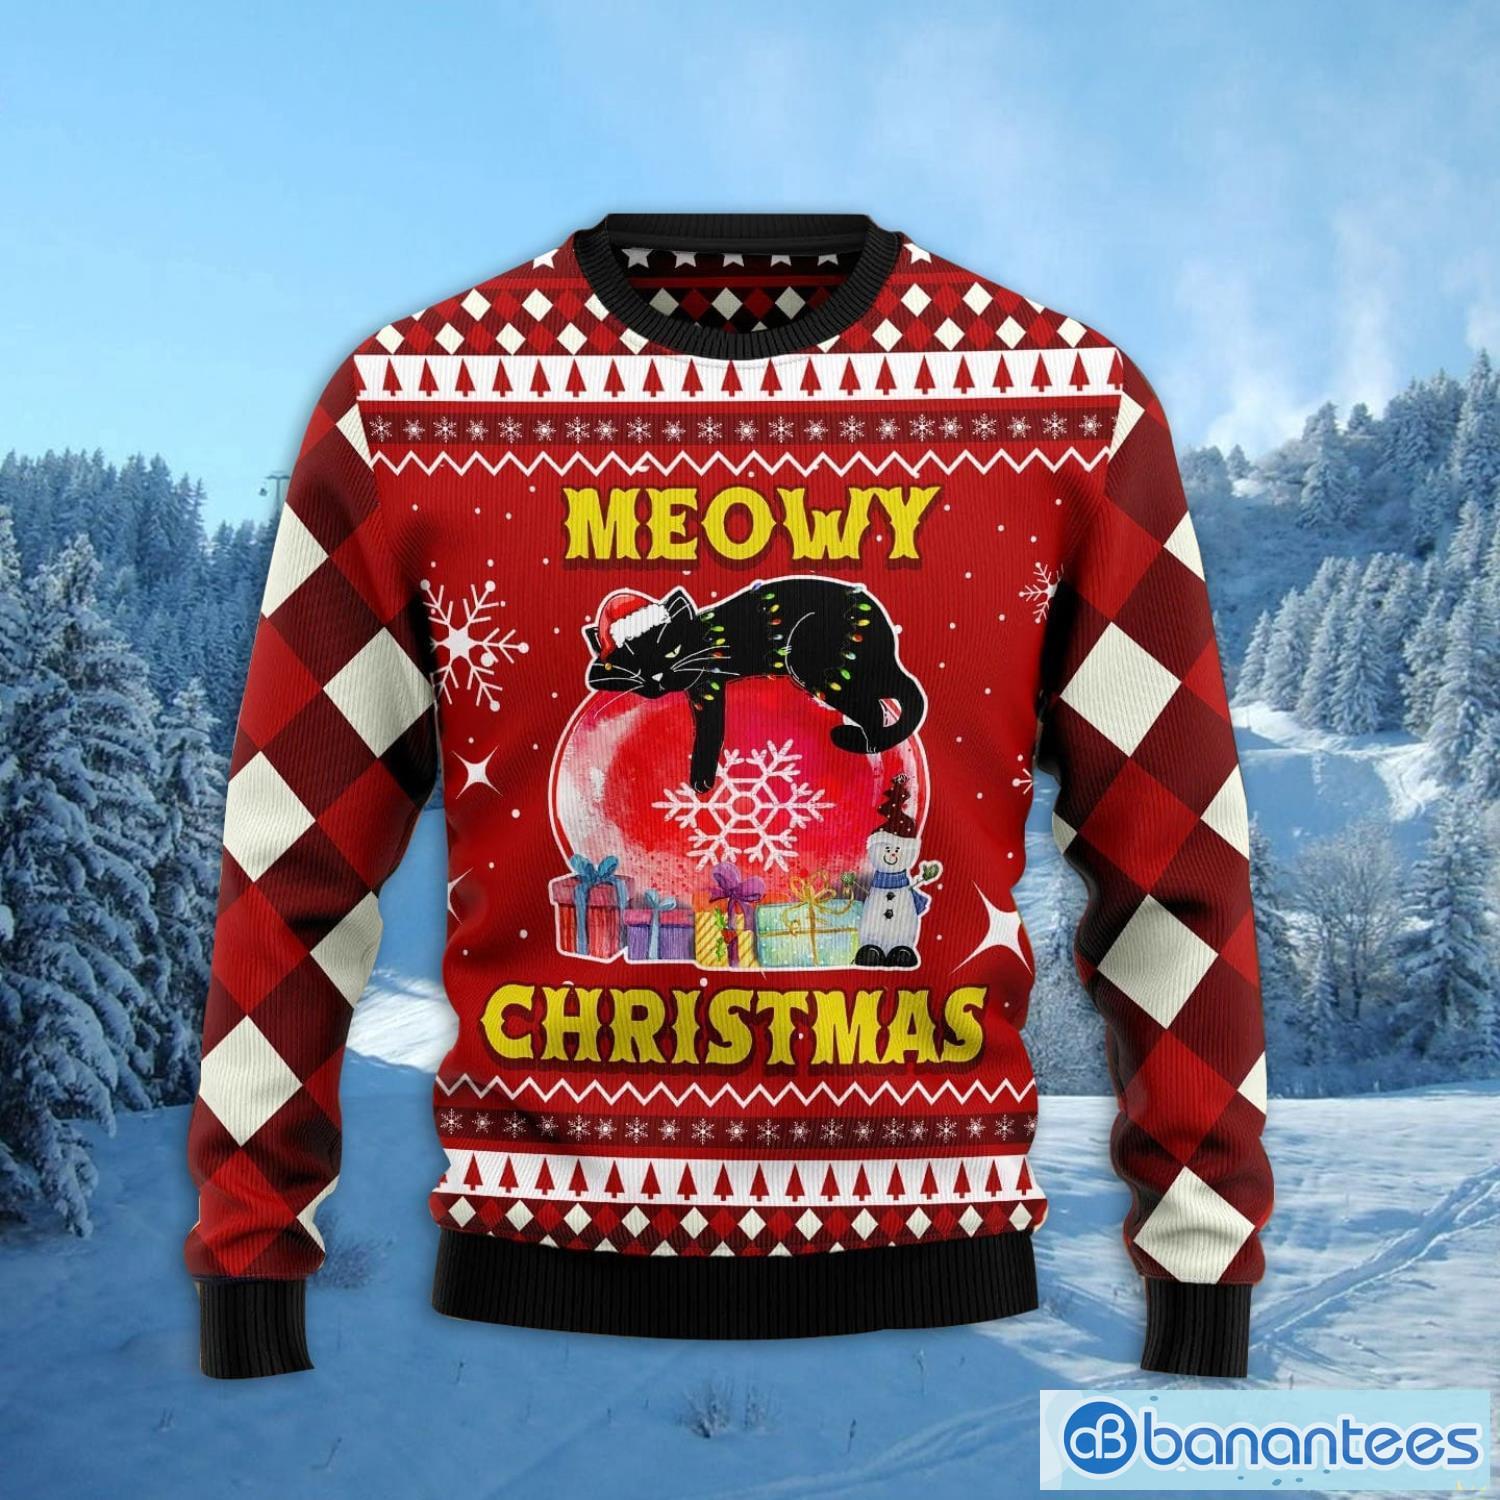 Meowy Christmas Ugly Christmas Sweater Gift For Holiday Product Photo 1